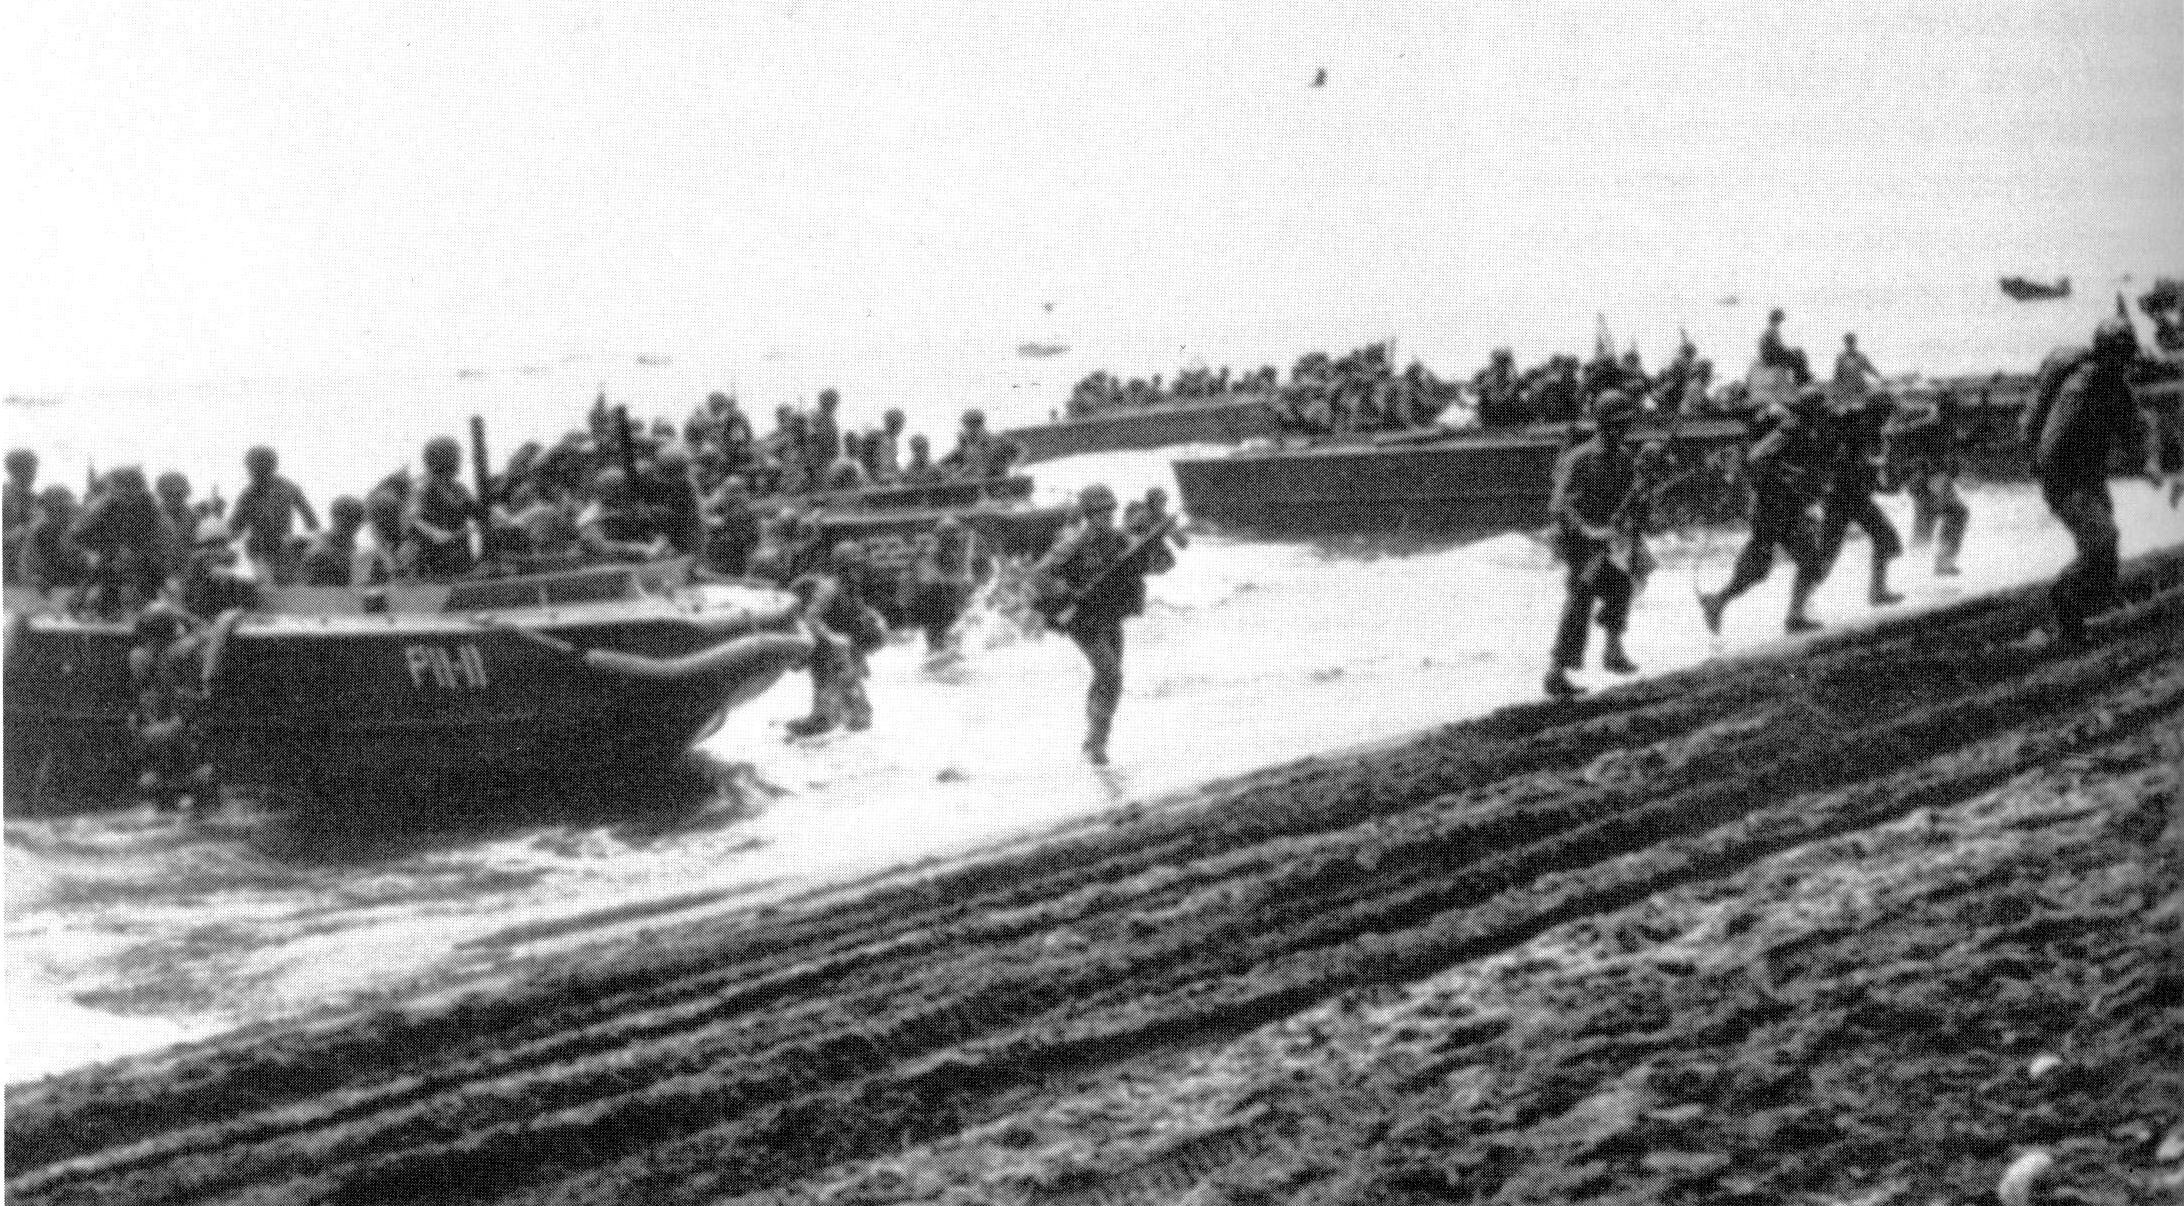 A faded image of Marines landing on Guadalcanal Aug 7, 1942. The Marines landing on Guadalcanal far outnumbered the unprepared Japanese troops and civilian airfield workers on the island, so the enemy fled for the cover of Guadalcanal’s jungle interior. (Courtesy of the U.S. Navy)